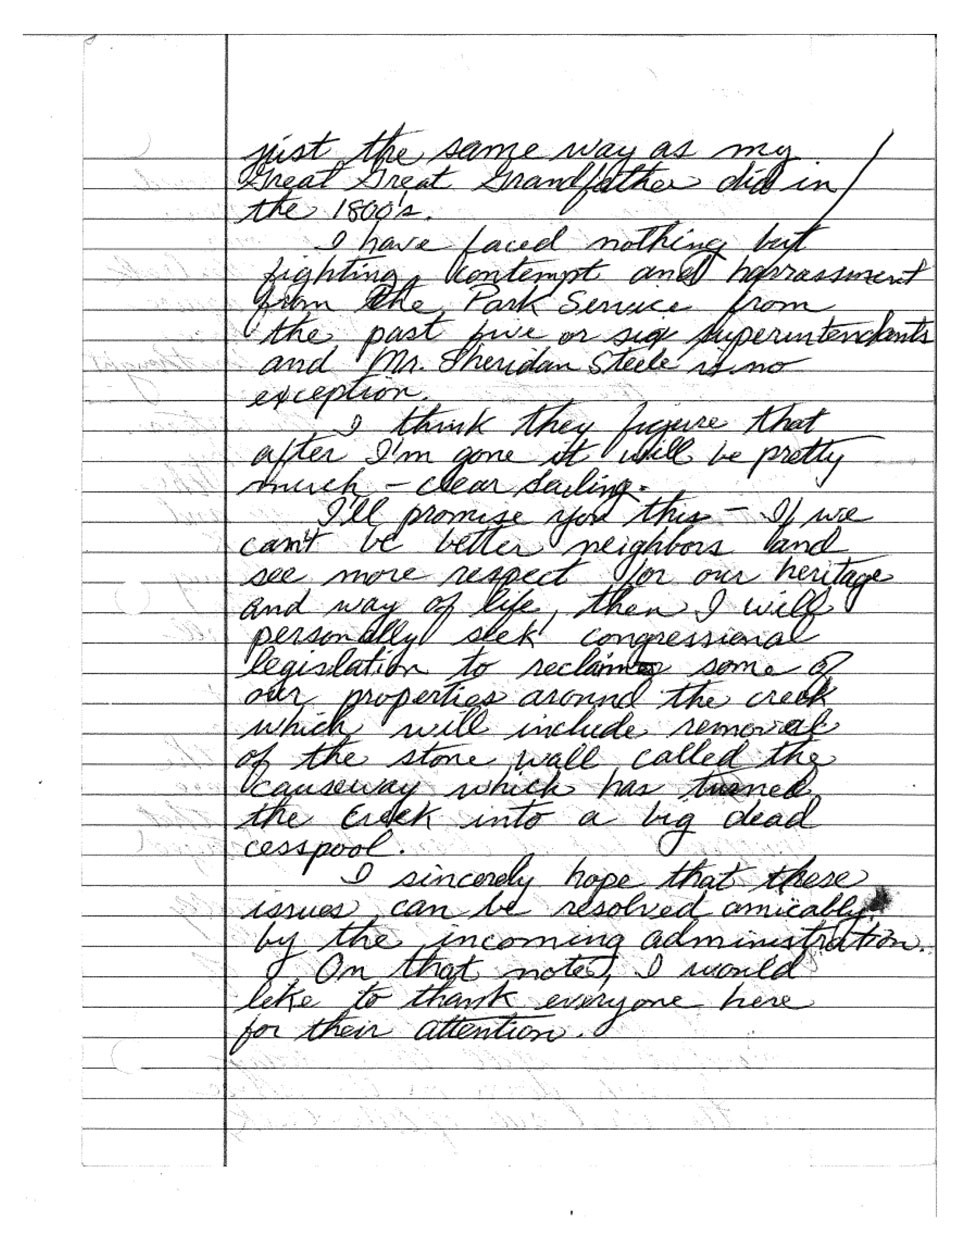 reference image of a hand written letter, page 2